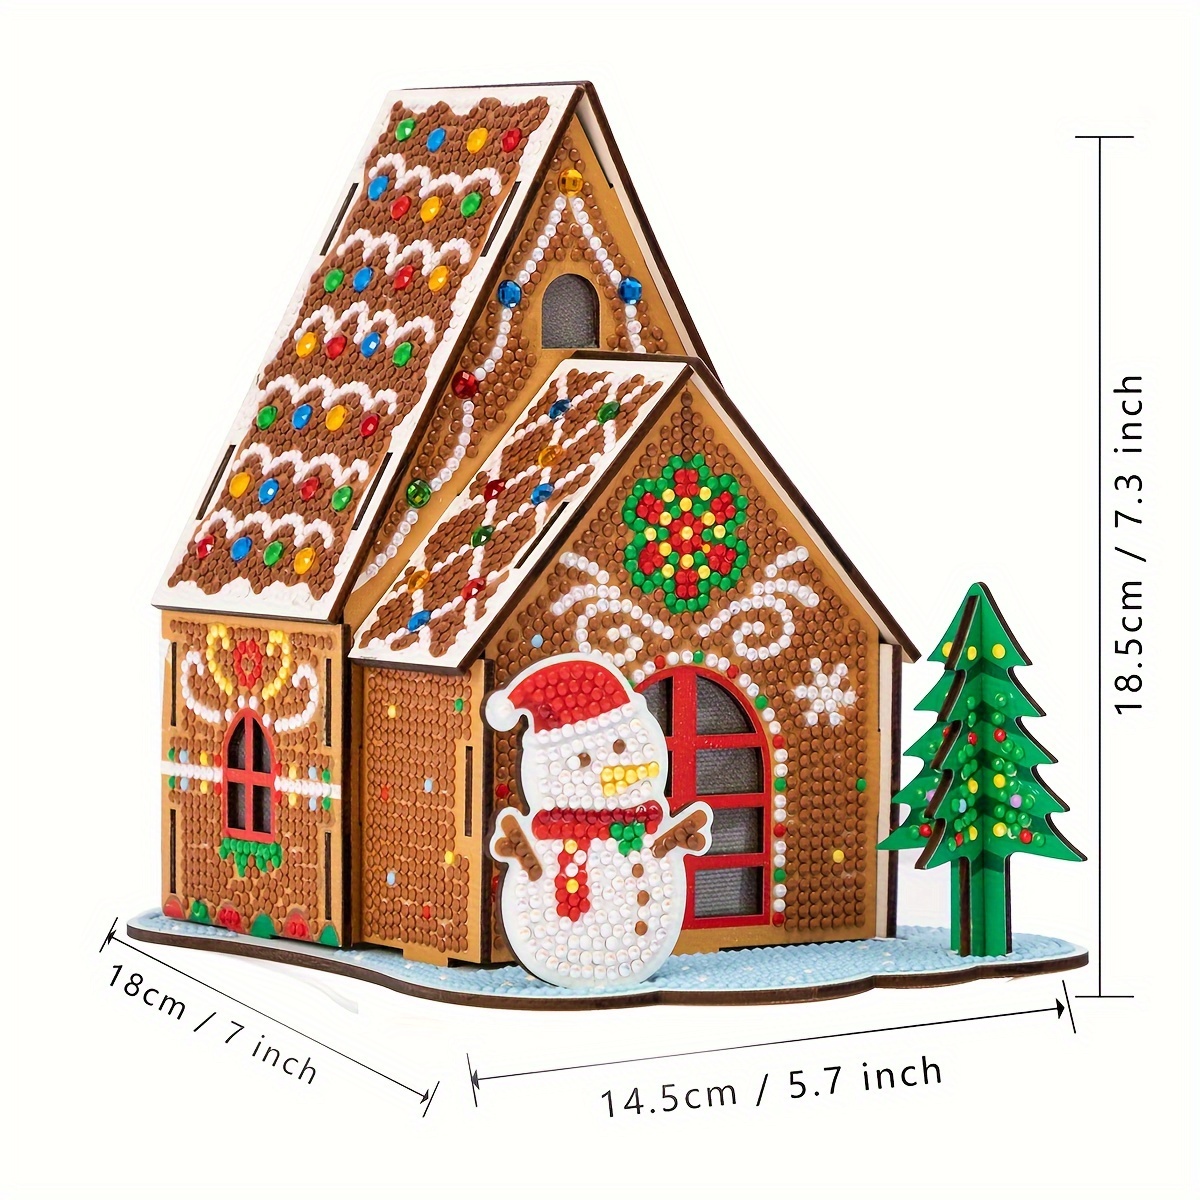 DIY 5D Diamond Painting The Gingerbread House Kits for Adults Full Round  Drill（12x8inch/30x20cm）, Paintings Embroidery Pictures Arts Craft for Home